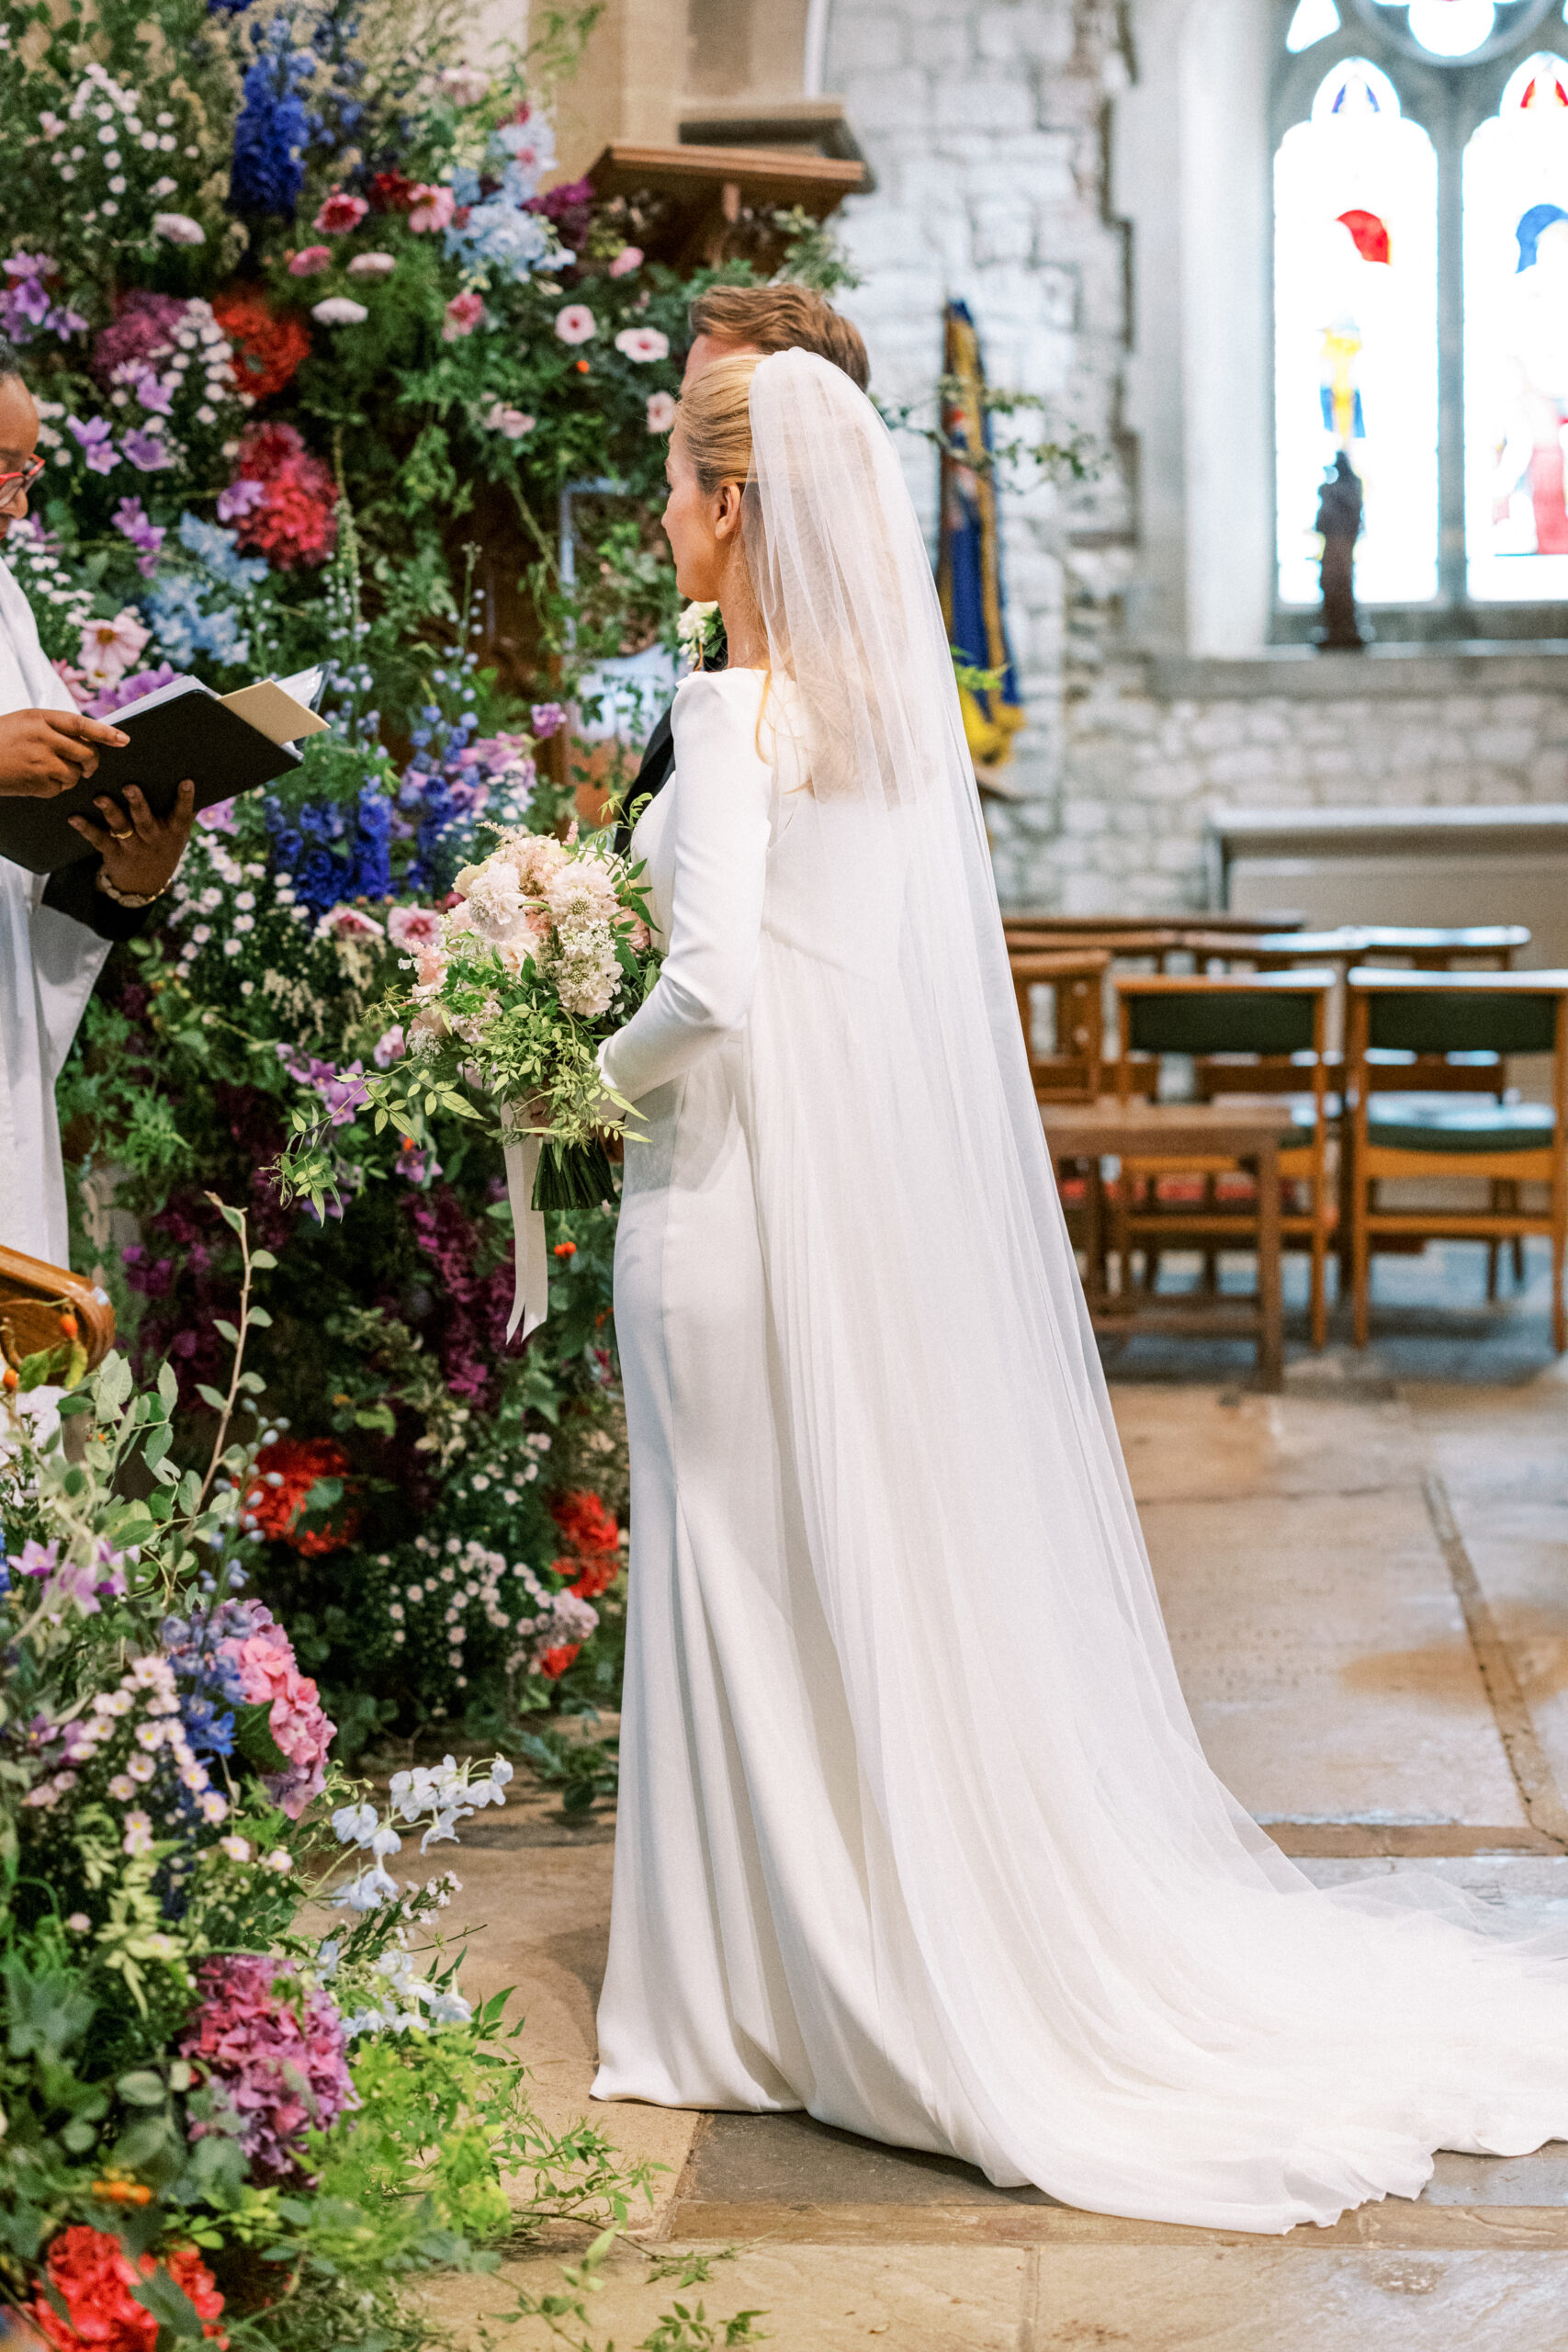 Wedding Photography at St Mary's Church in Chichester